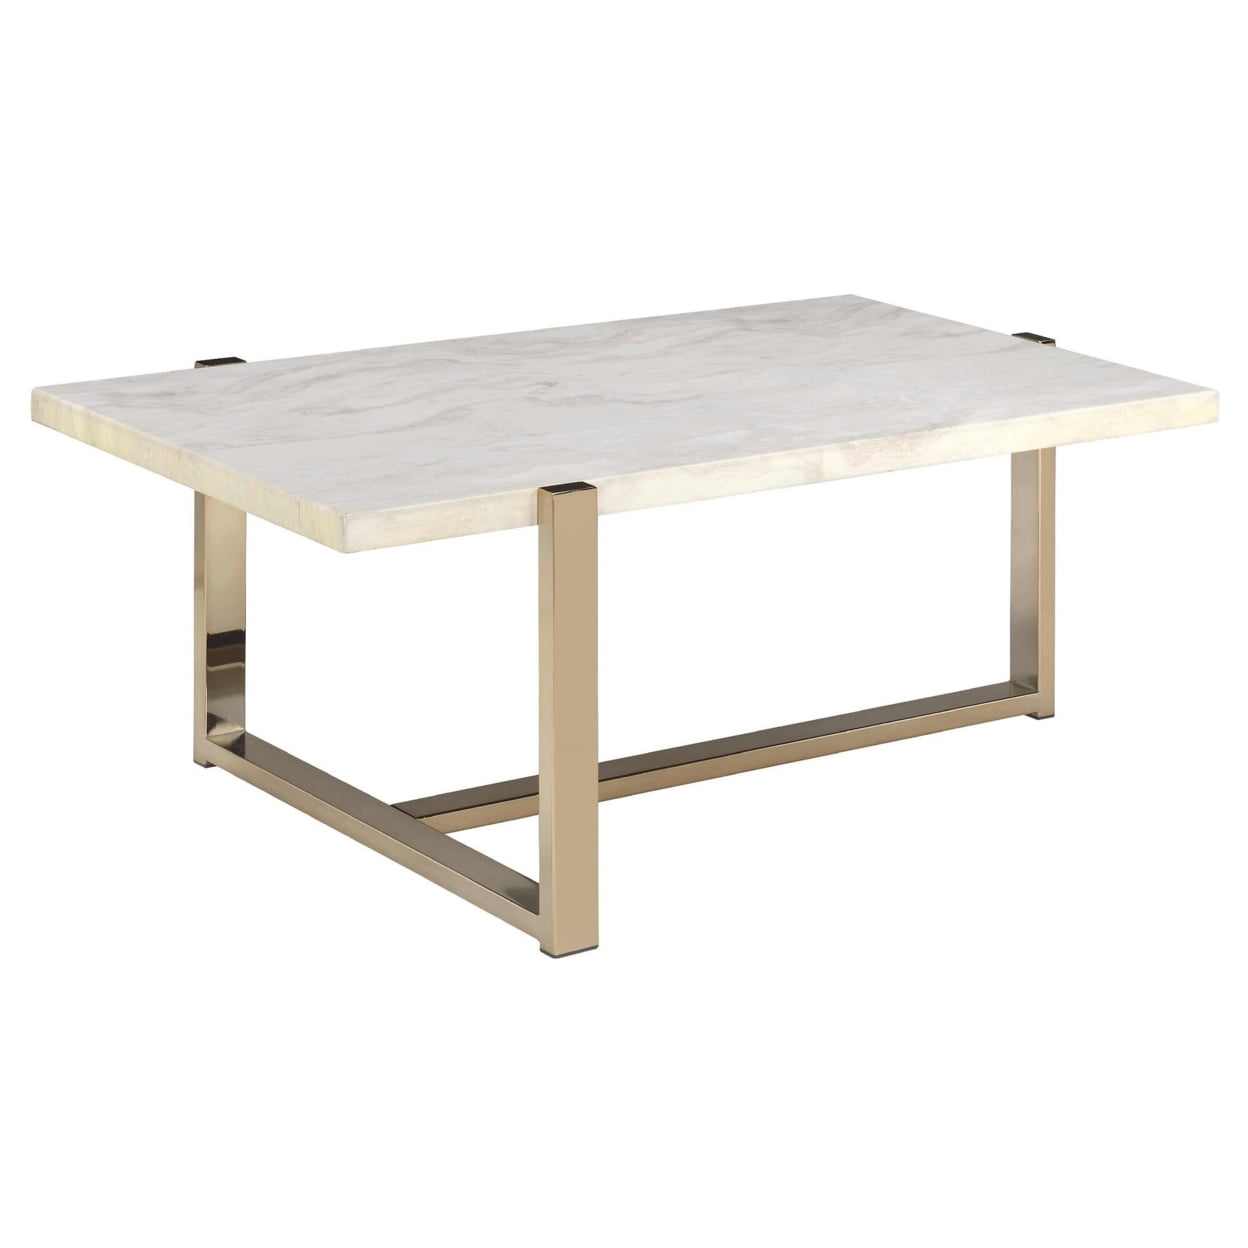 Picture of ACME 83105 Feit Coffee Table - Faux Marble & Champagne - 18 x 43 x 26 in.